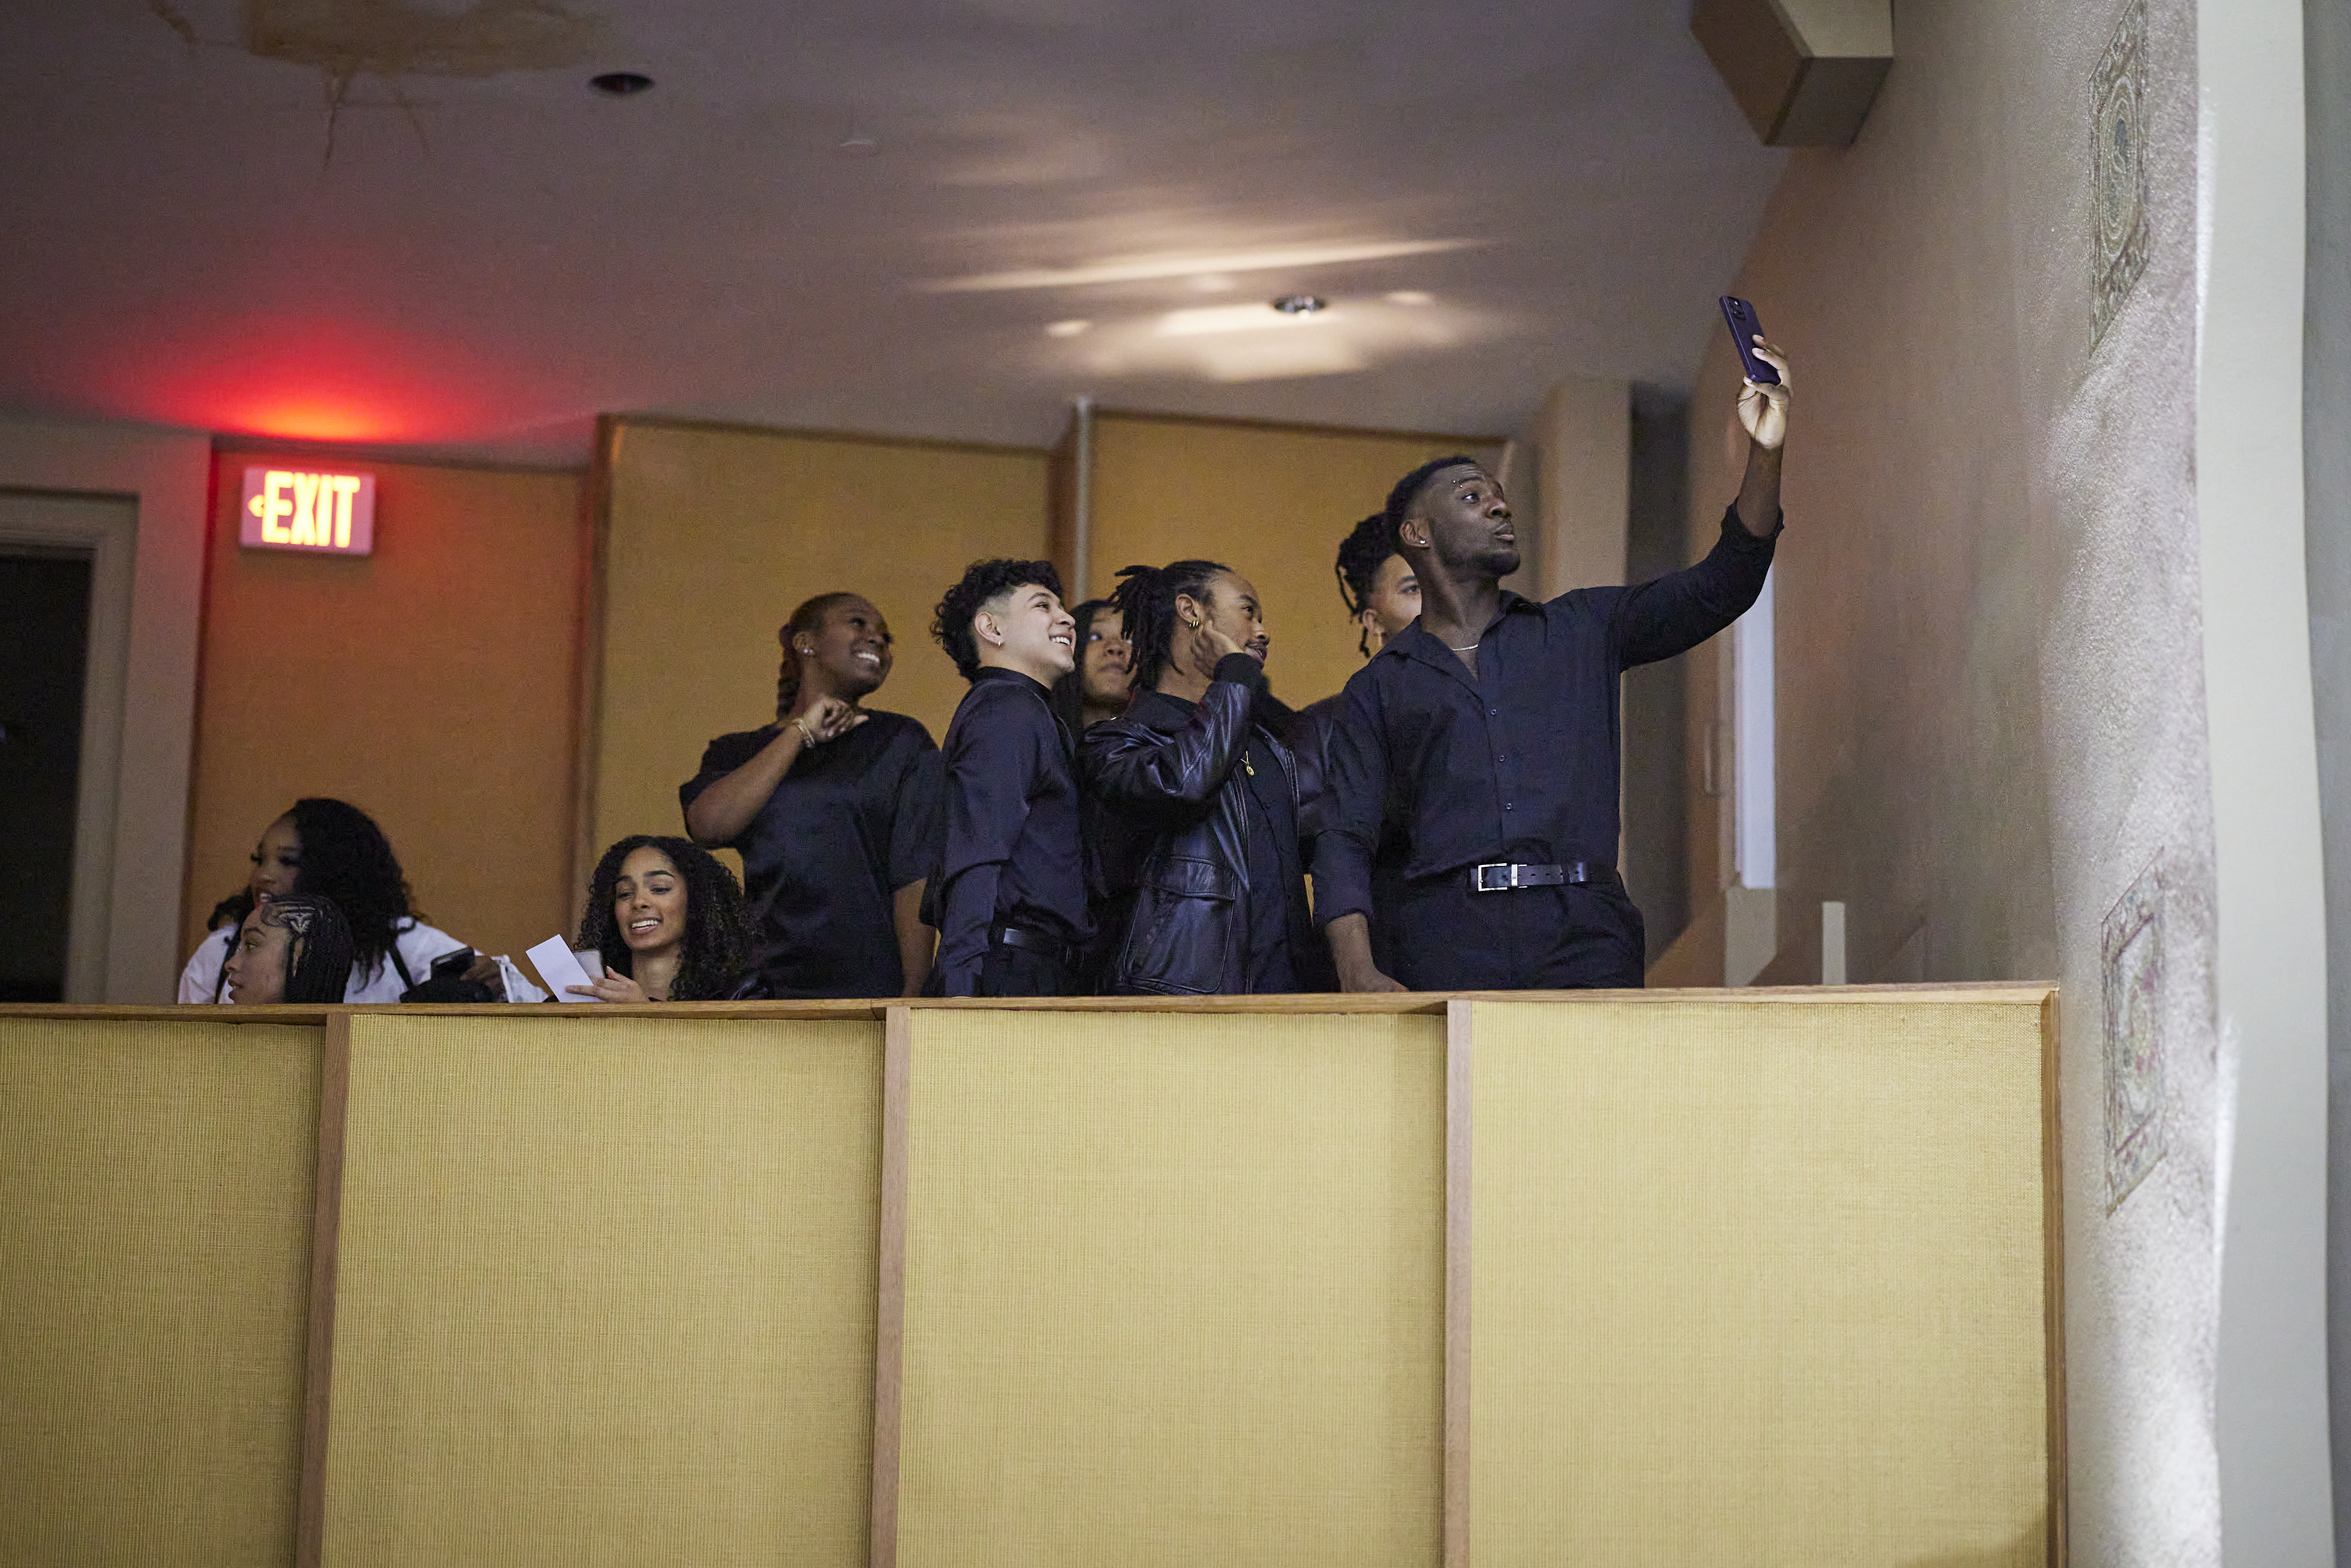 A group of students taking a selfie in the balcony of an auditorium at an event.